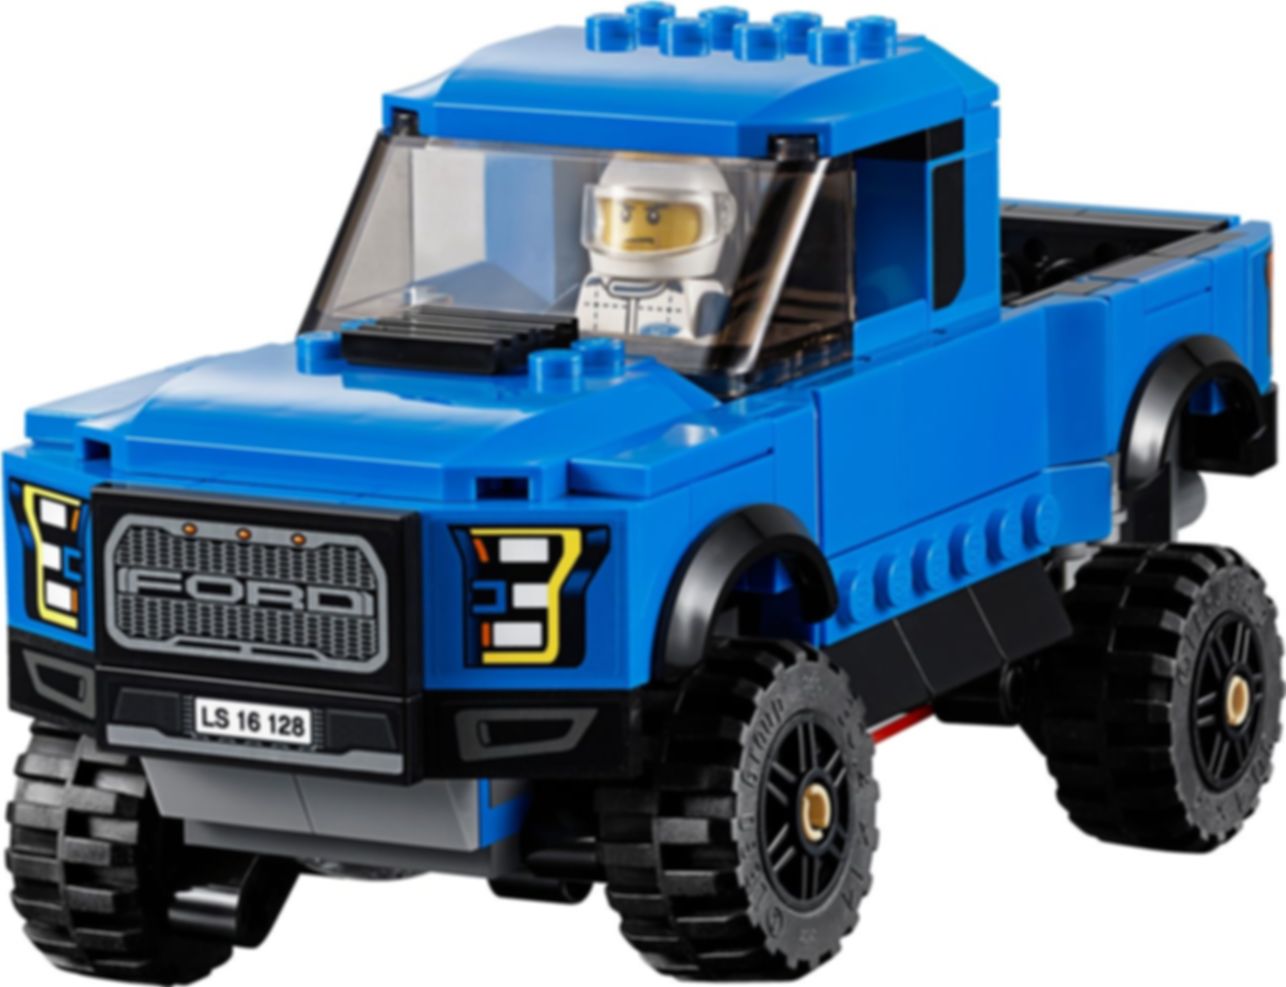 LEGO® Speed Champions Ford F-150 Raptor et le bolide Ford Modèle A composants